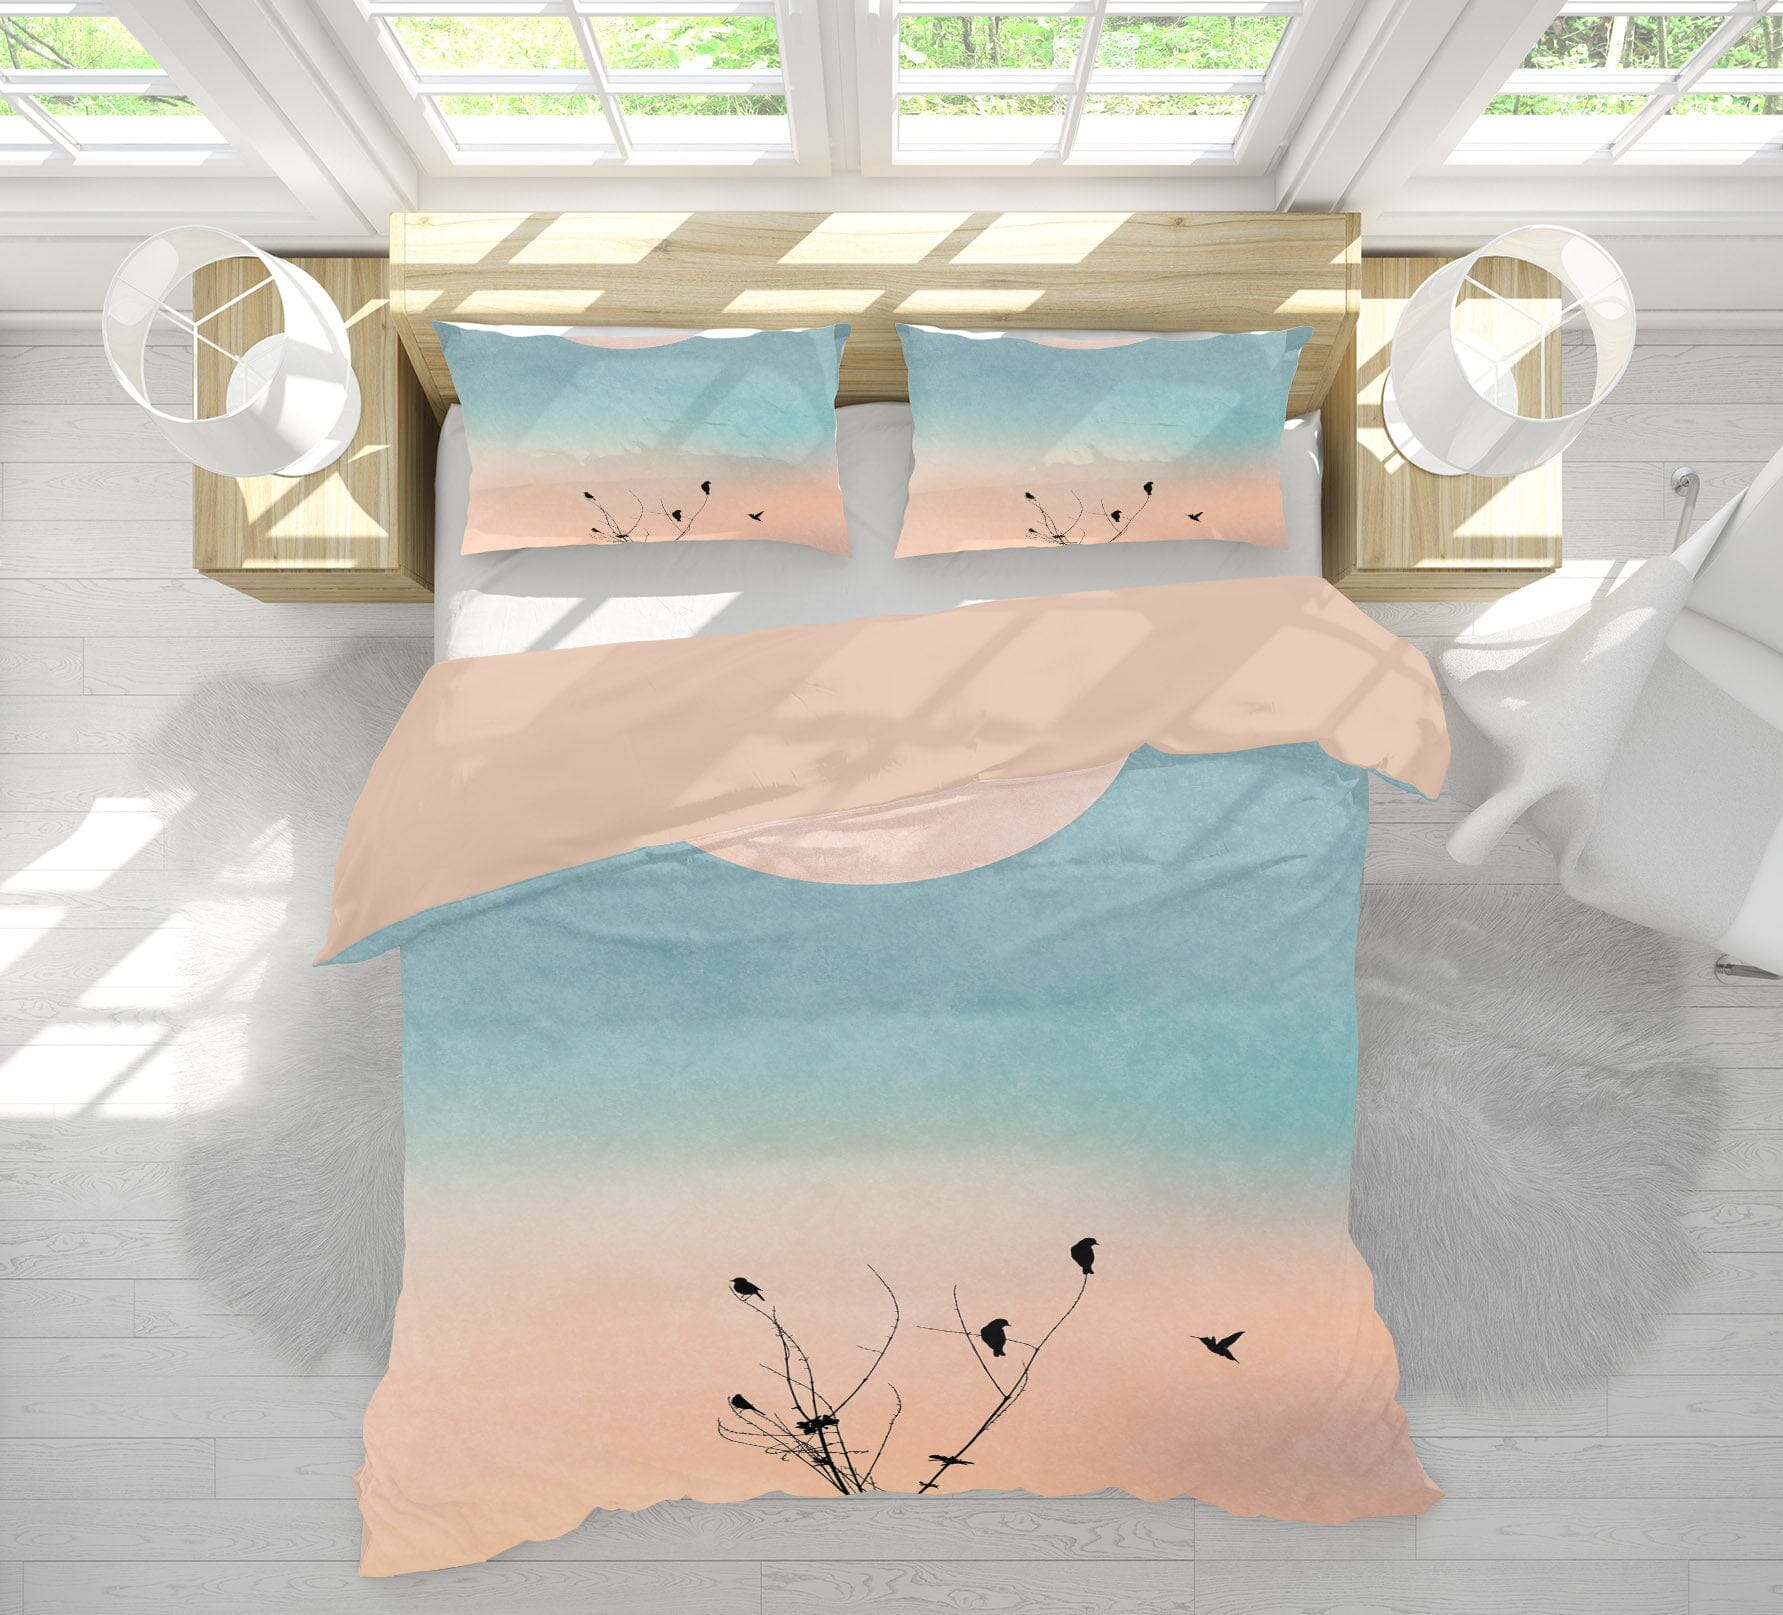 3D Waking Up Warm 2125 Boris Draschoff Bedding Bed Pillowcases Quilt Quiet Covers AJ Creativity Home 